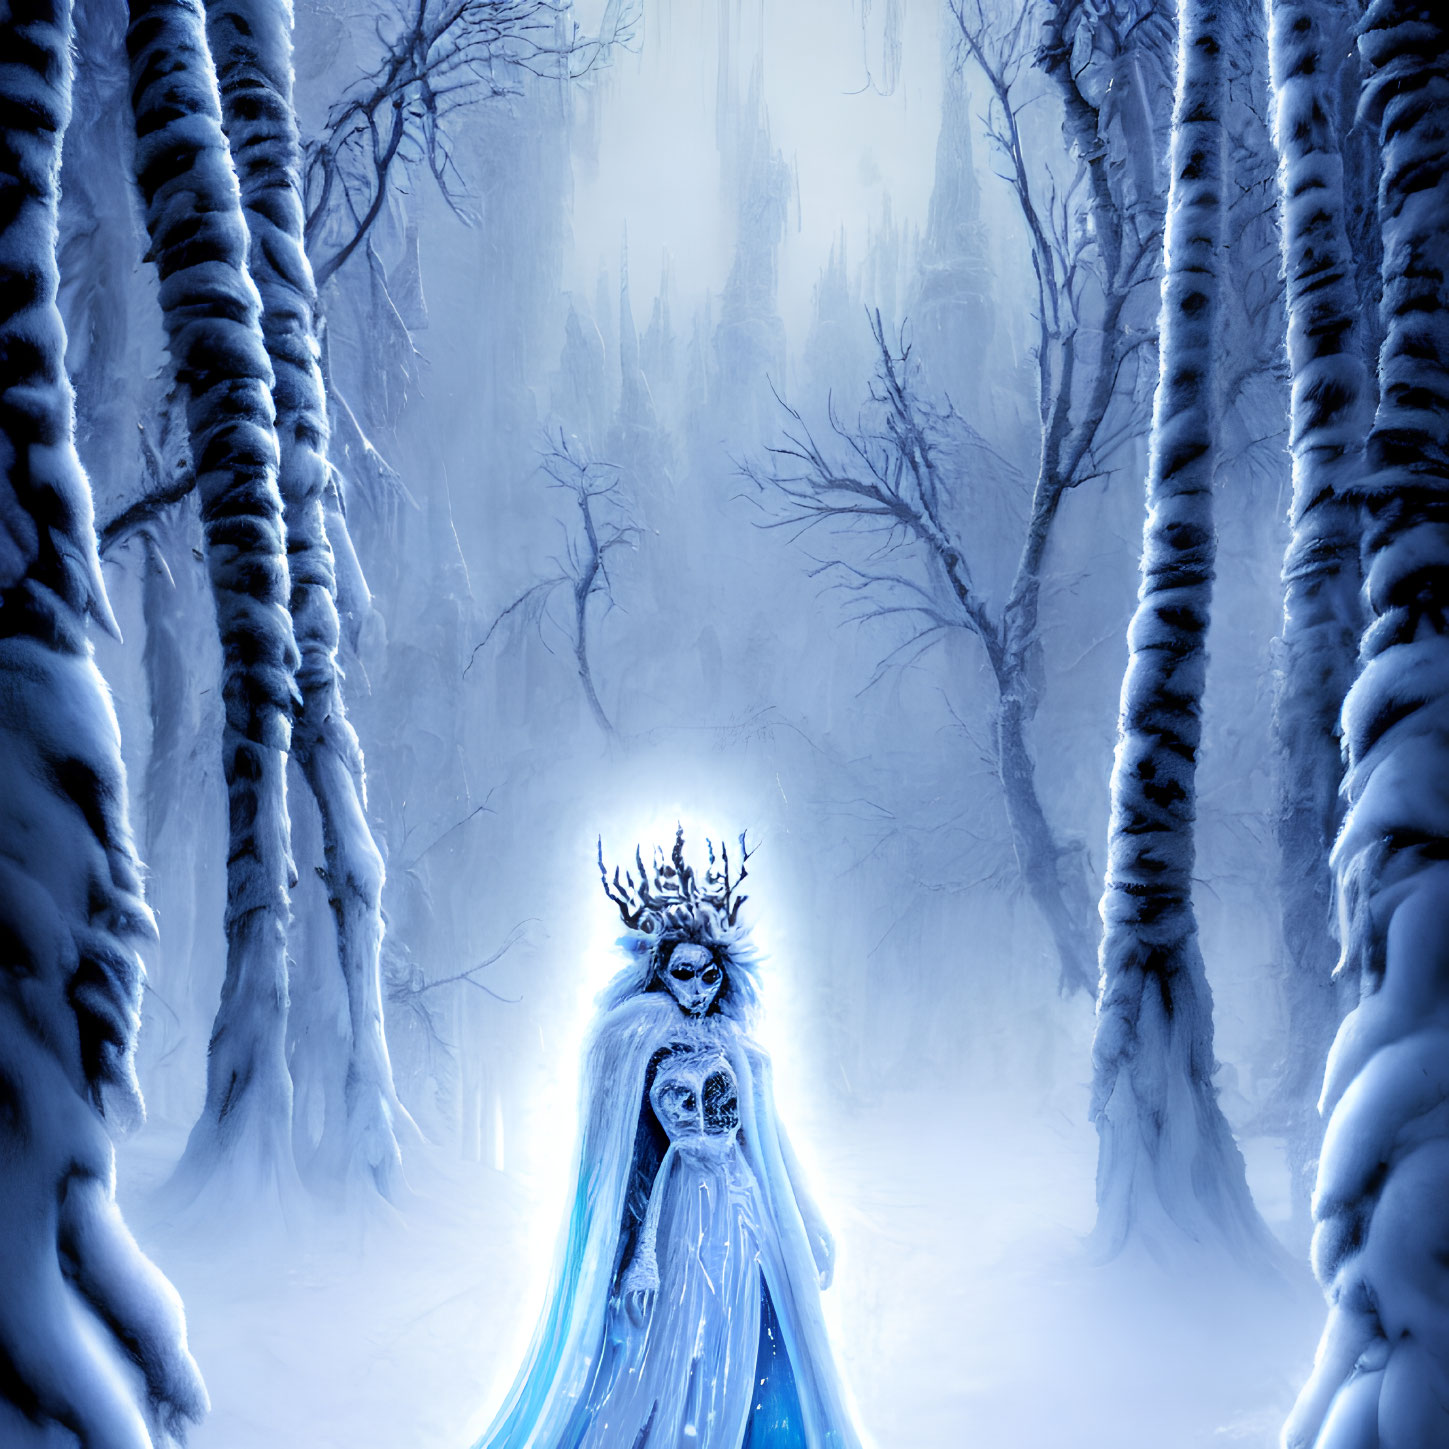 Ethereal figure in deer skull mask and antlers in snowy forest